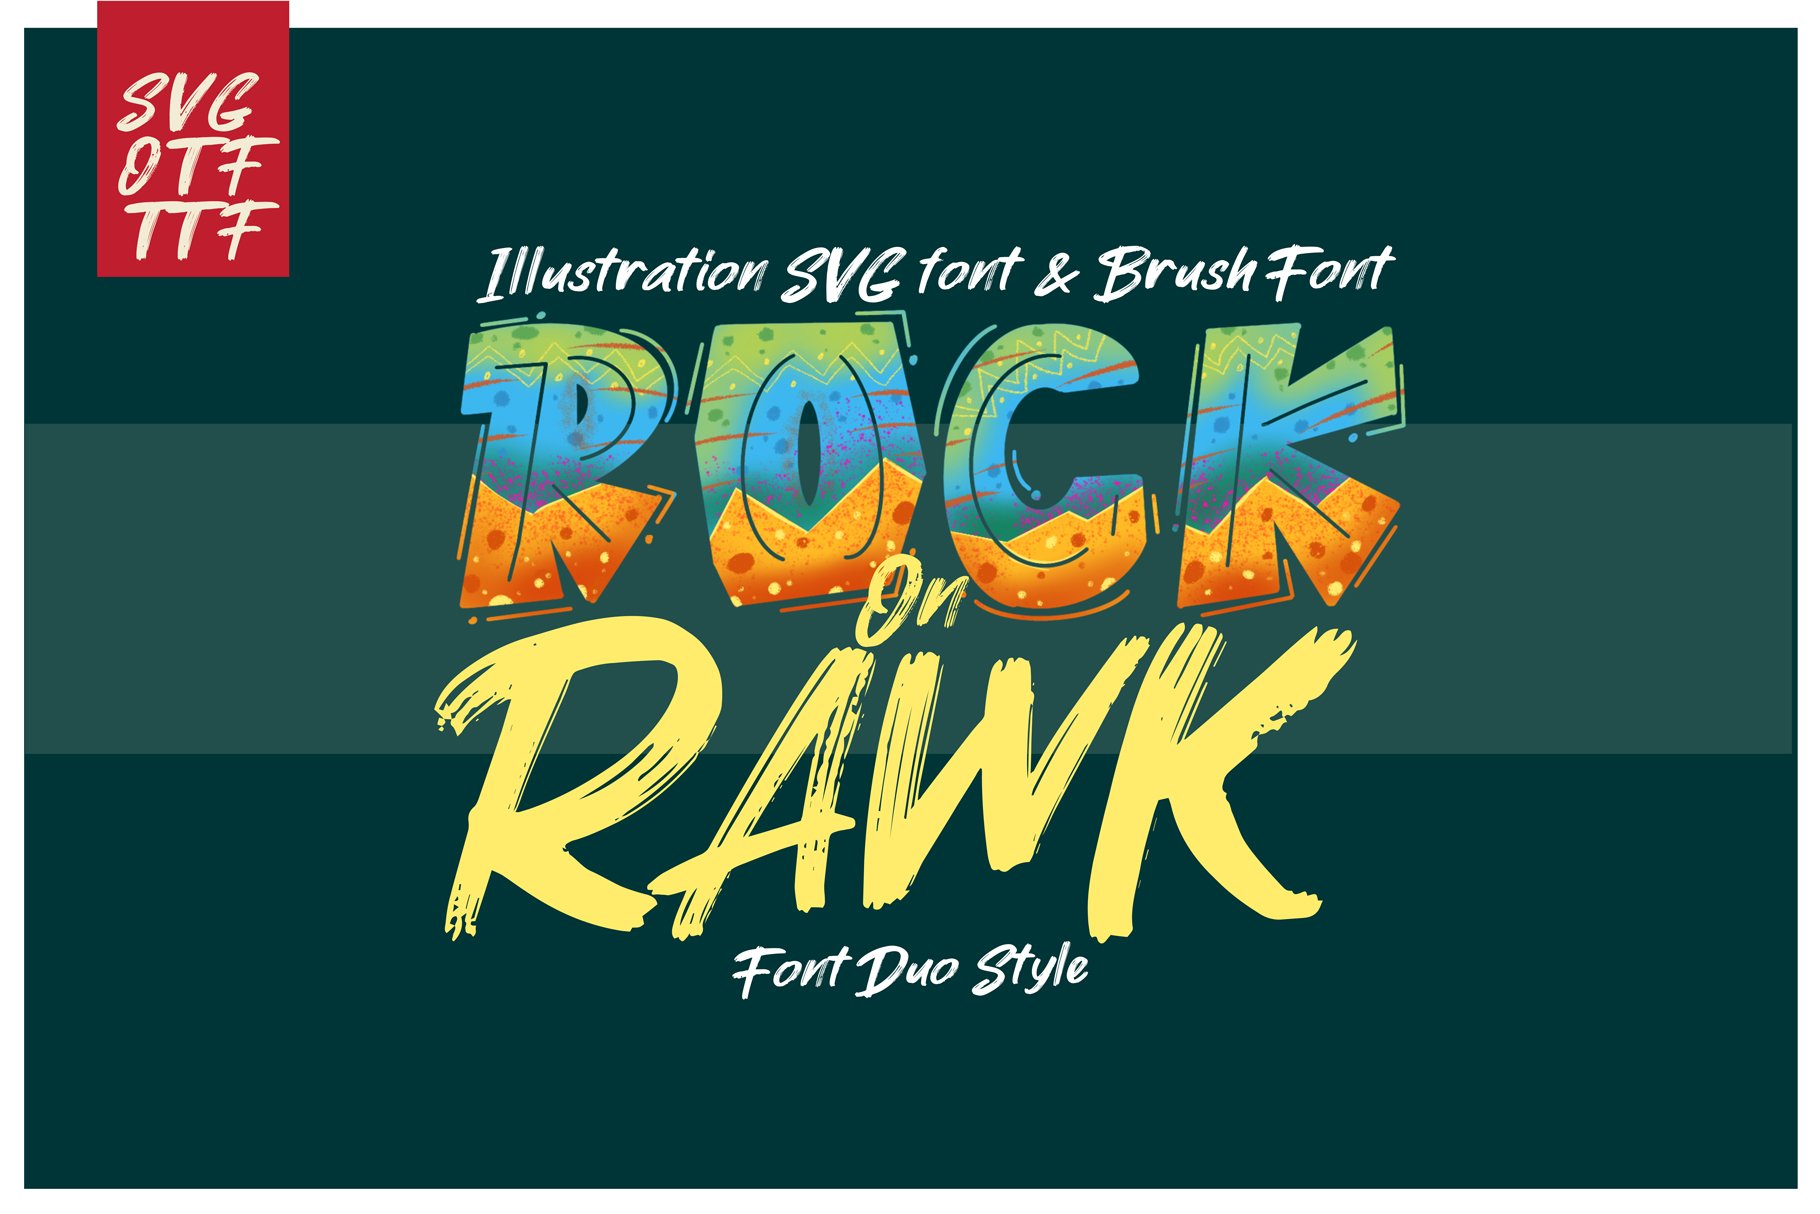 ROCK on RAWK | SVG Font Duo cover image.